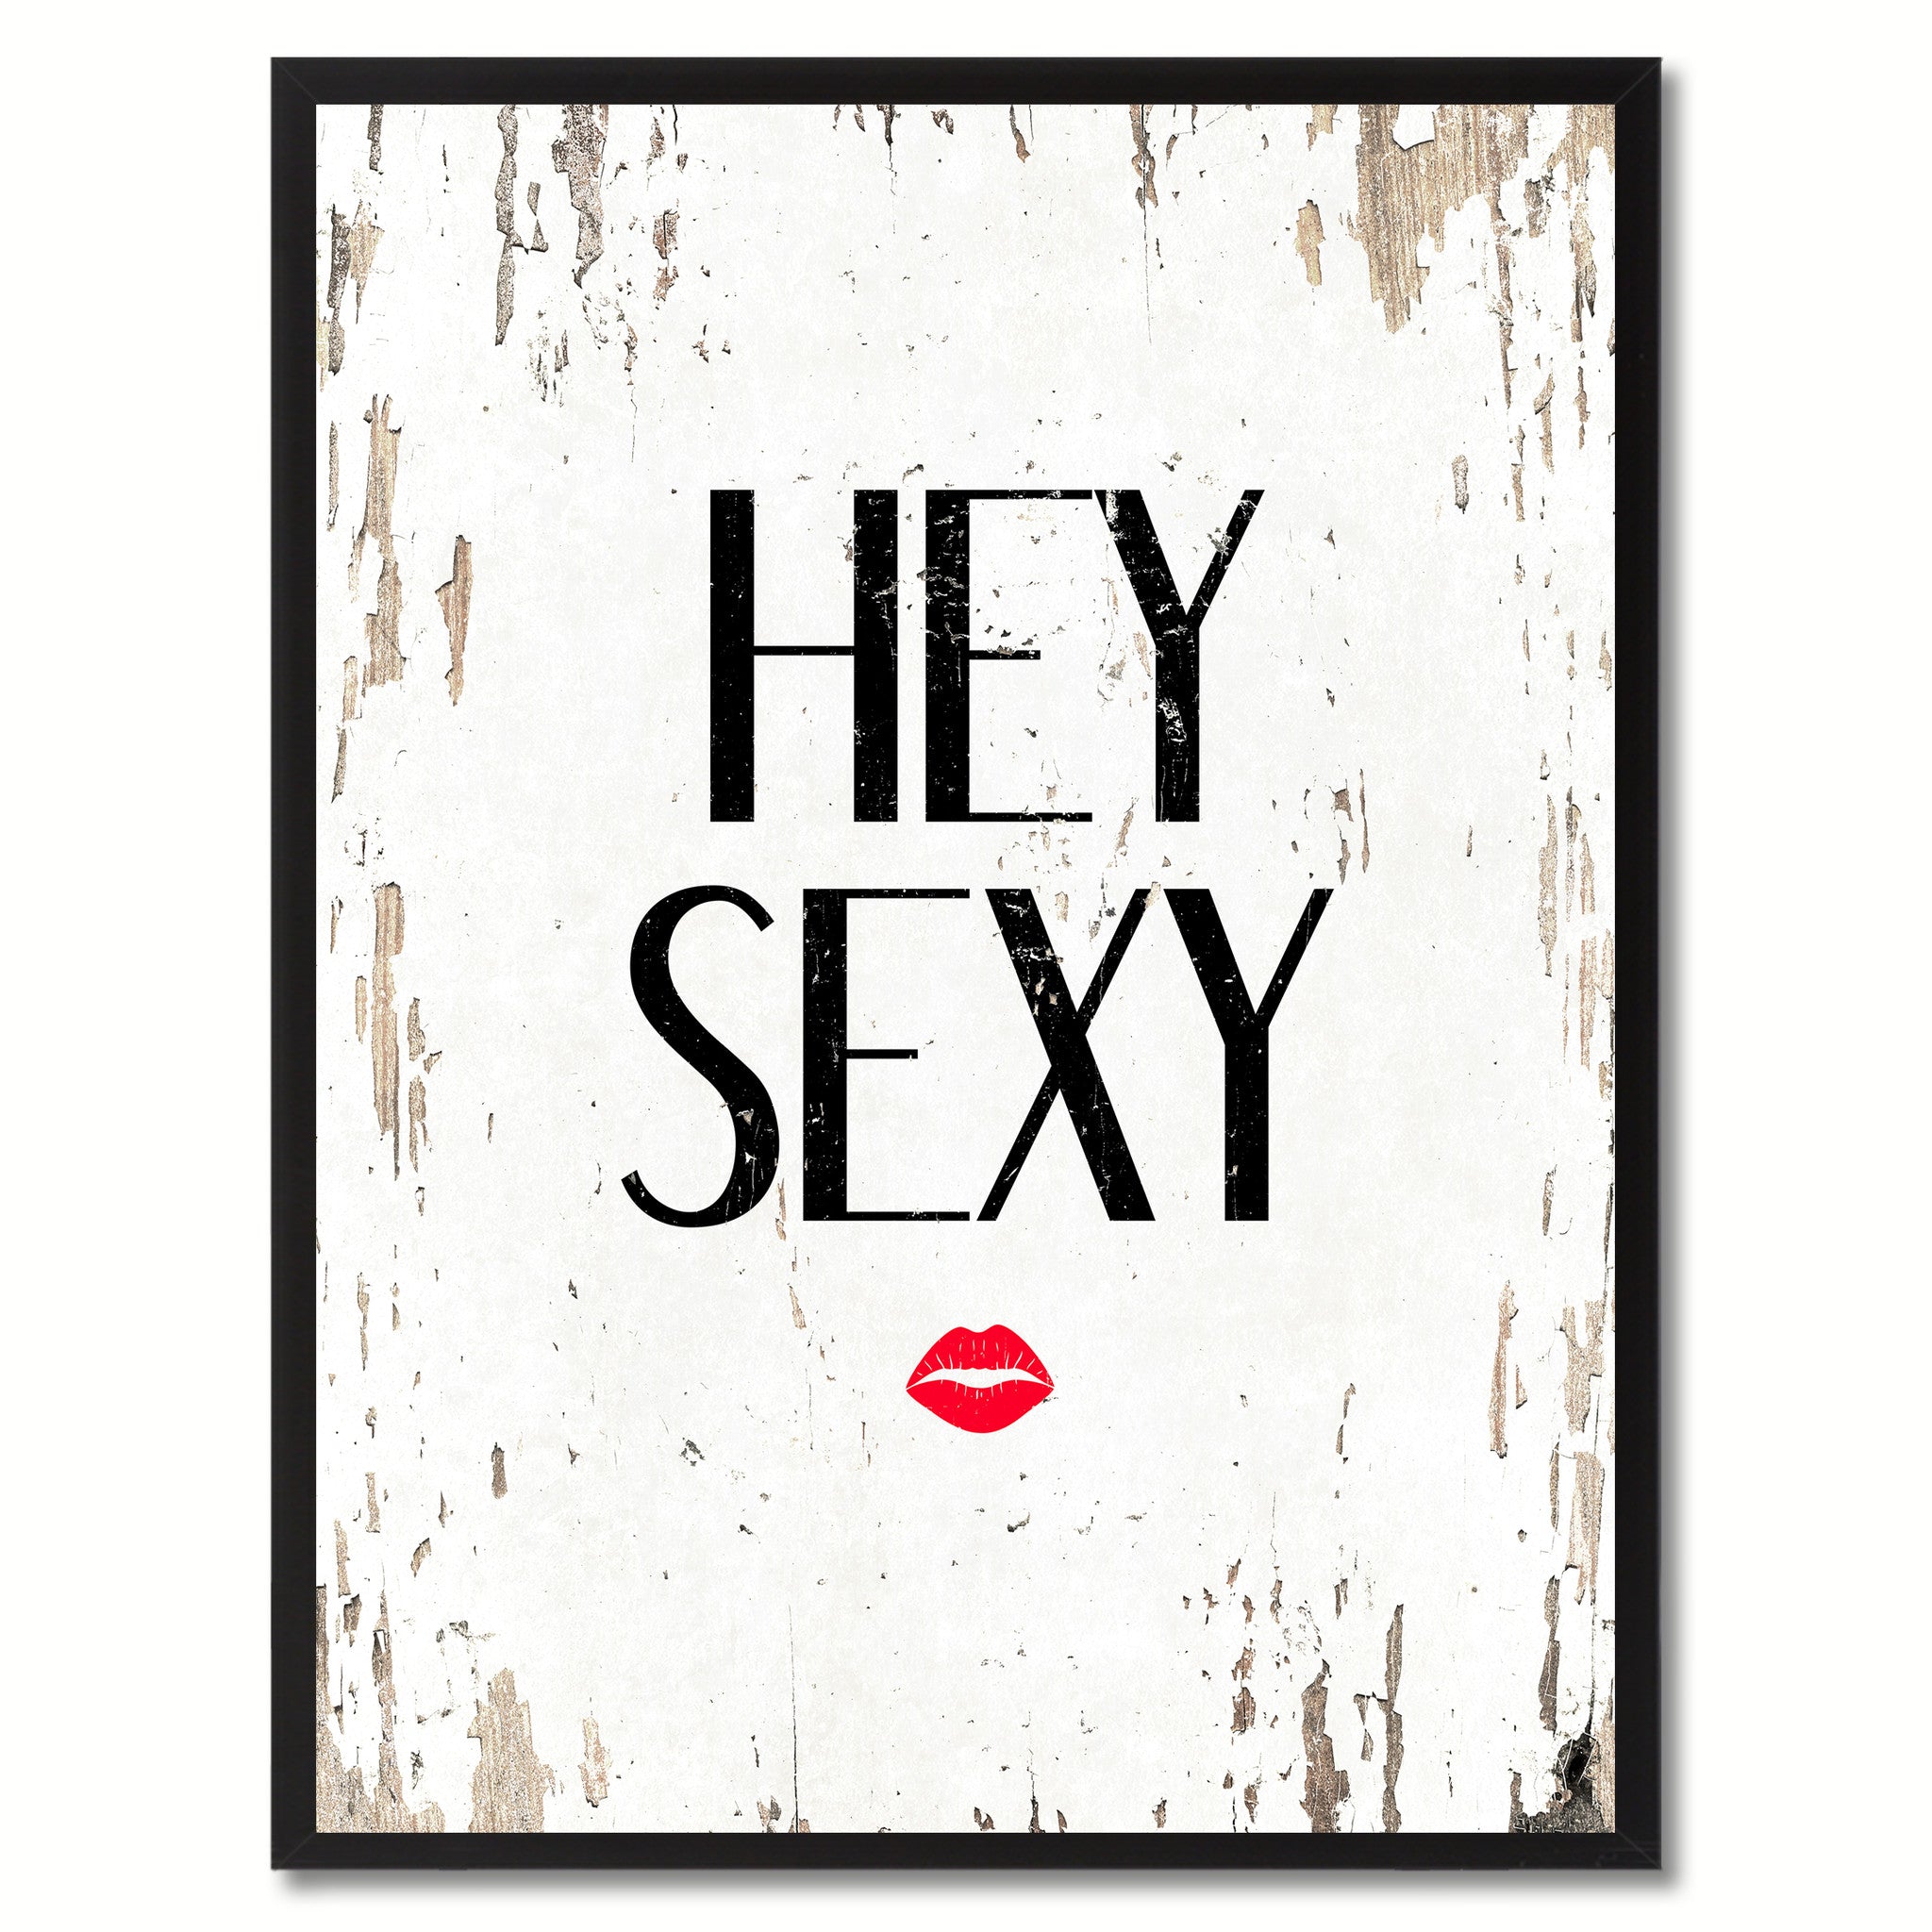 Hey Sexy Saying Canvas Print, Black Picture Frame Home Decor Wall Art Gifts